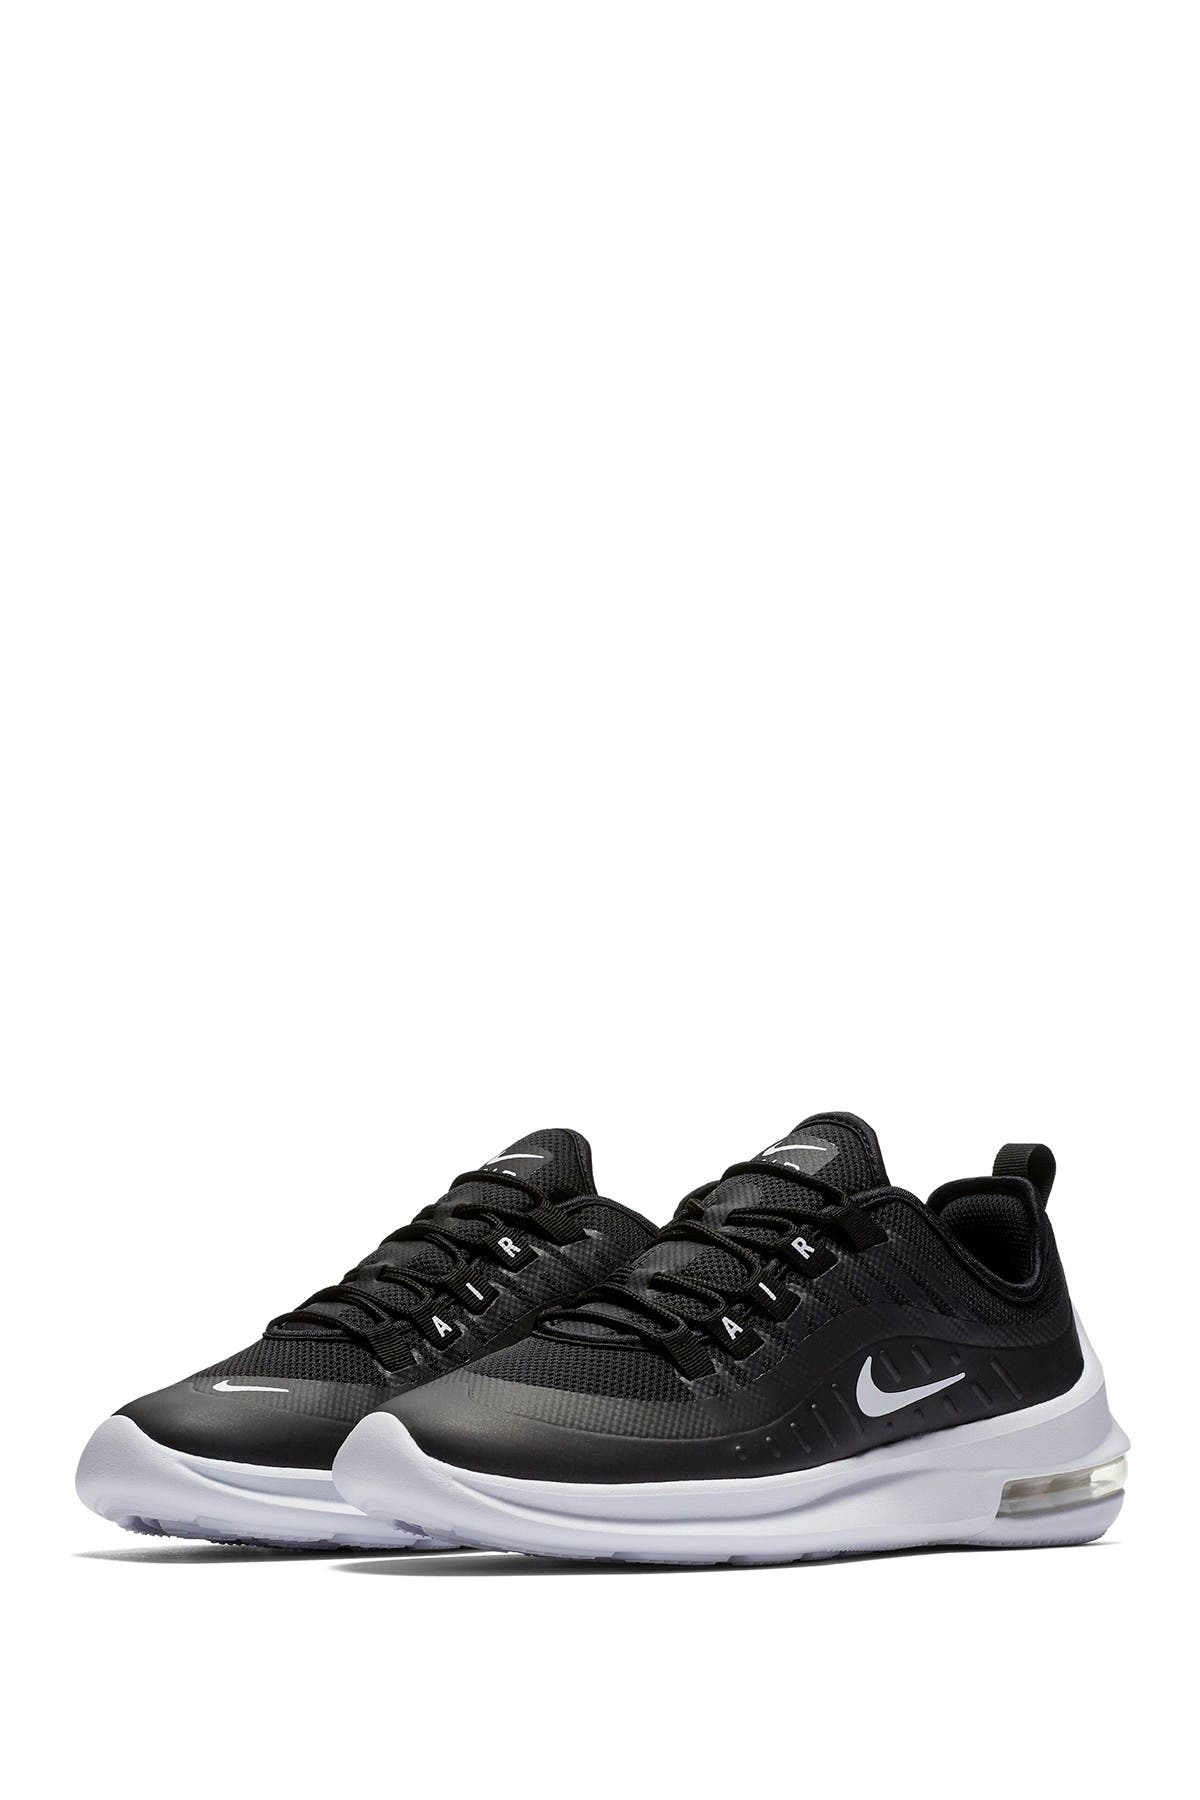 nike women's air max axis stores